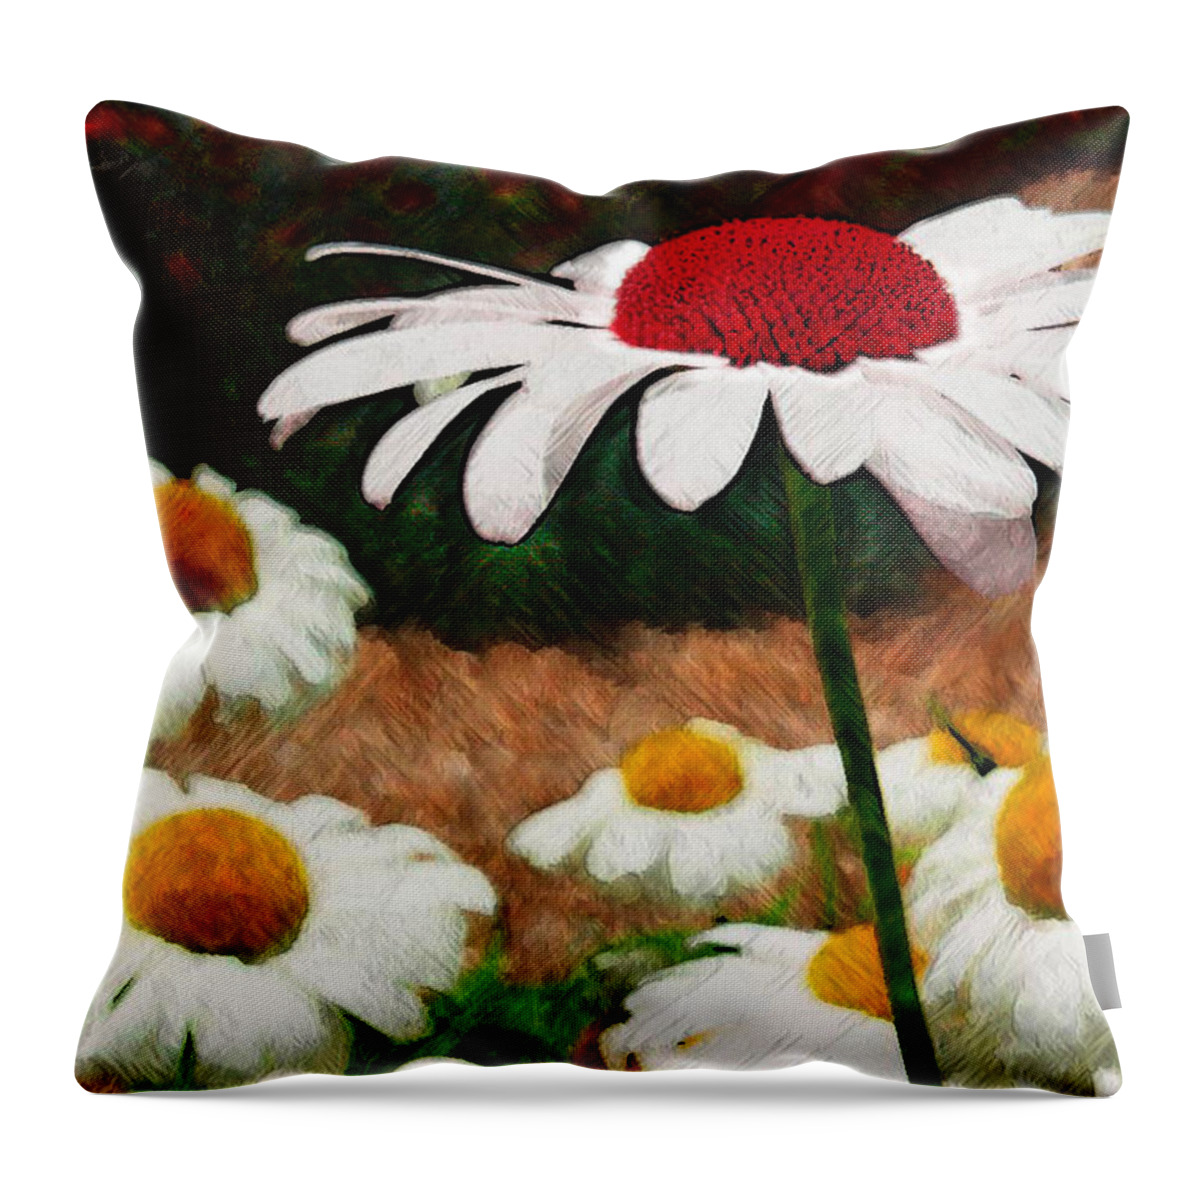 Ebsq Throw Pillow featuring the photograph Red Eyed Daisy by Dee Flouton